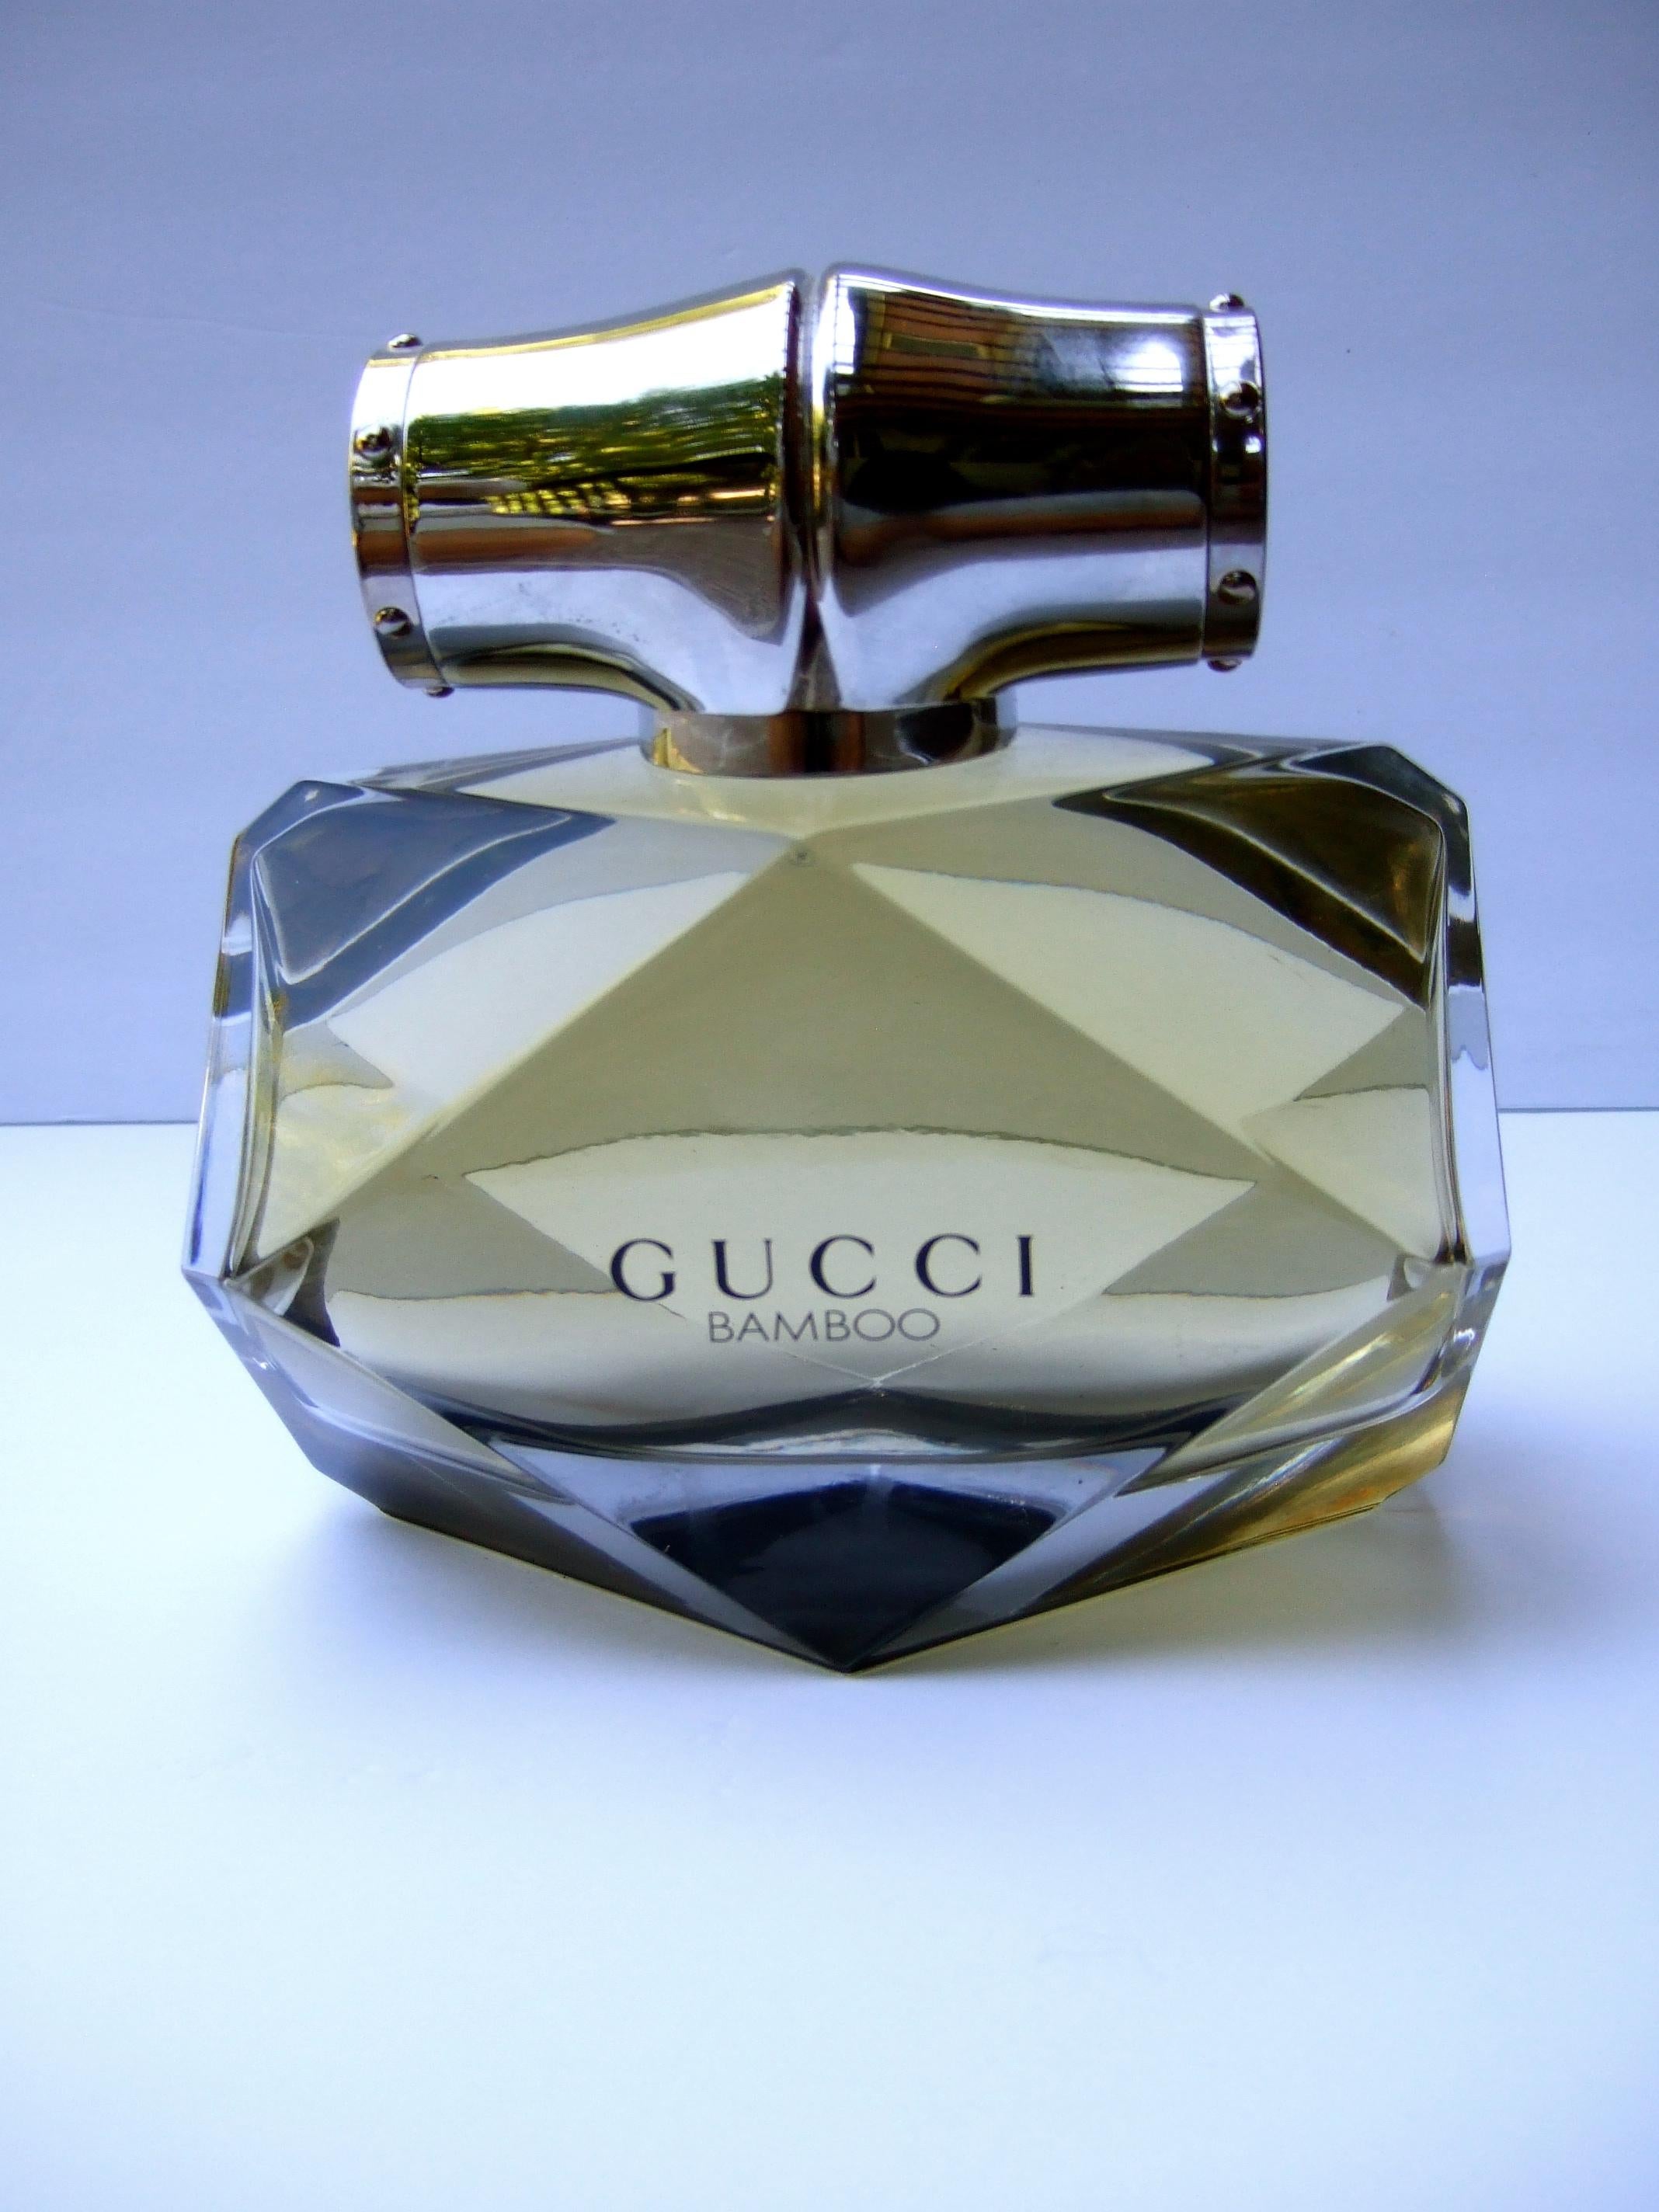 Gucci Bamboo Huge Glass Factice Faceted Display Dekorative Flasche c 21st c  im Zustand „Gut“ im Angebot in University City, MO